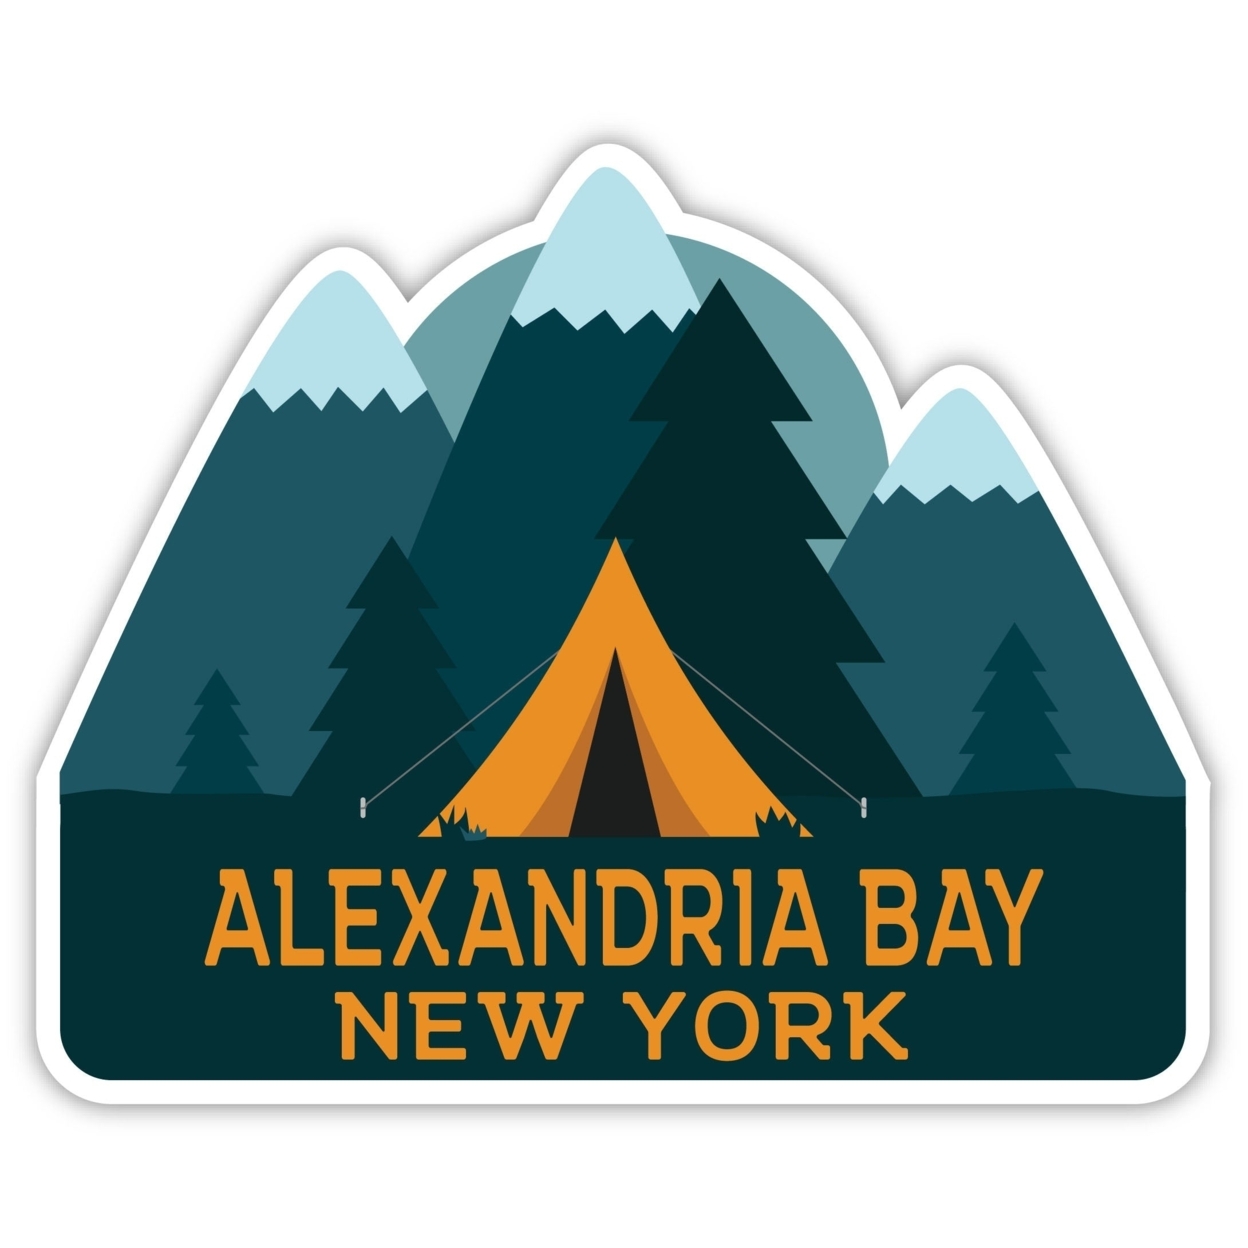 Alexandria Bay New York Souvenir Decorative Stickers (Choose Theme And Size) - 4-Pack, 8-Inch, Tent